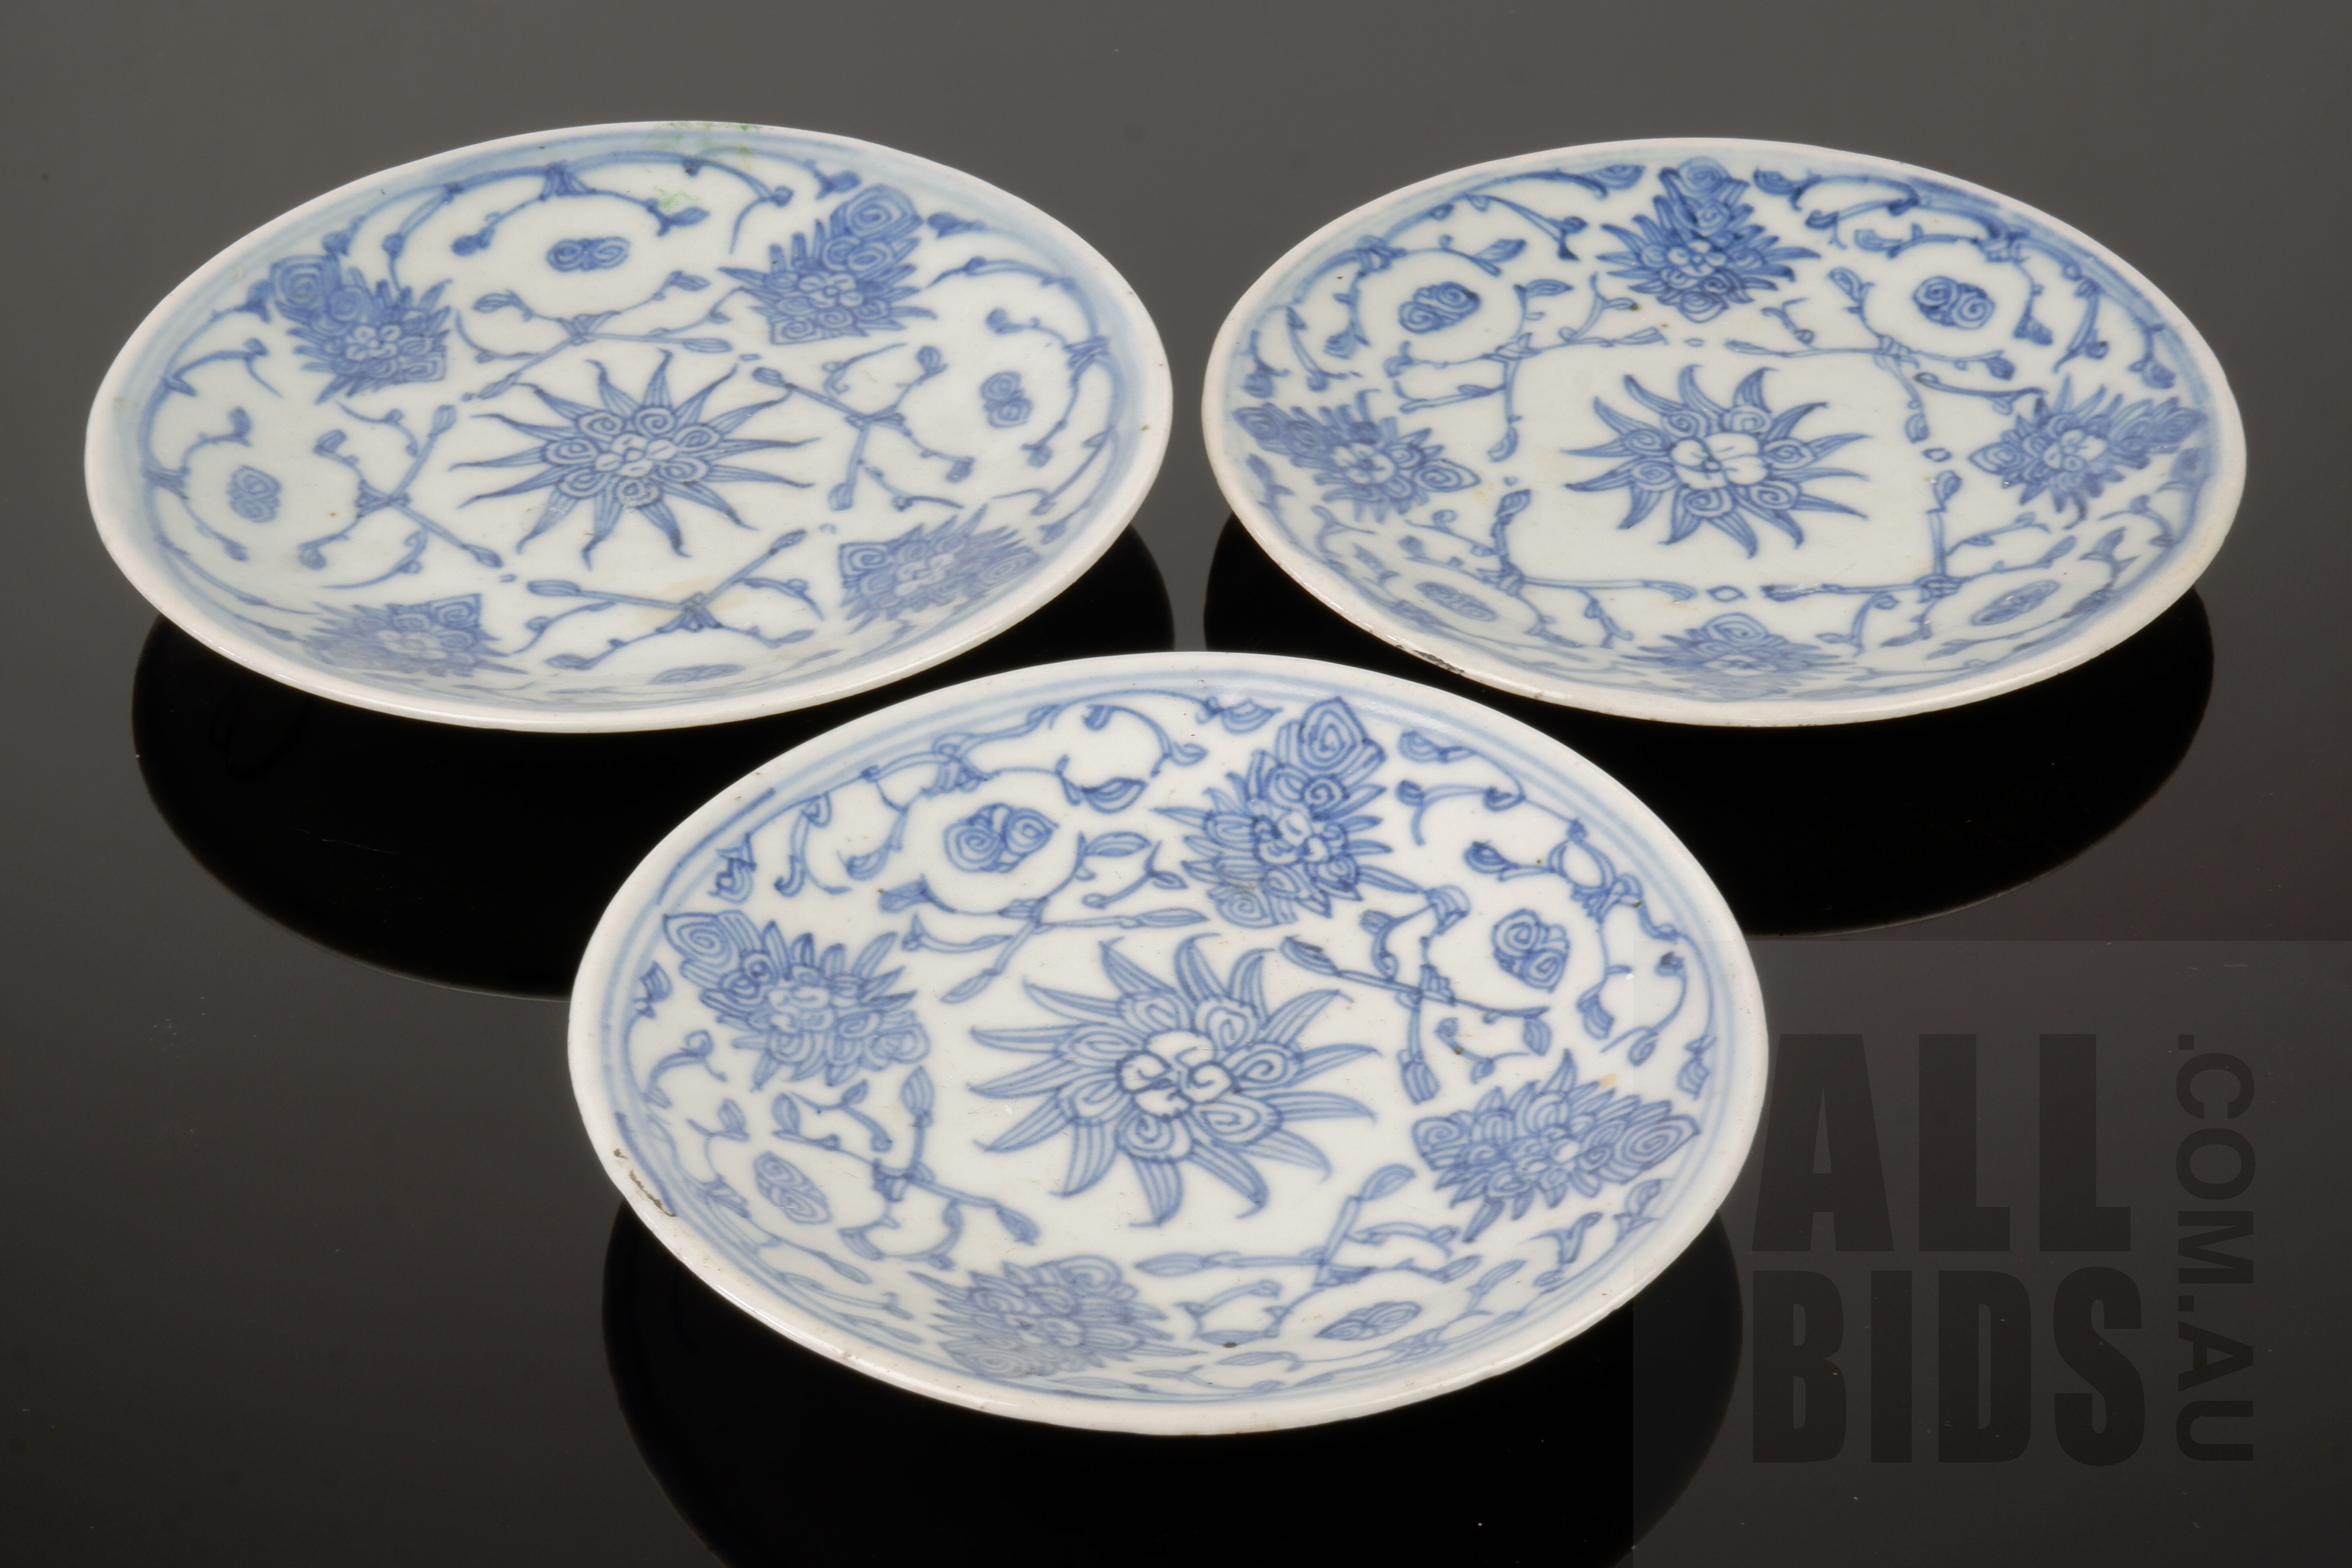 'Three Chinese Qing Blue and White Dishes, Seal Marks (Minyao), 19th Century'